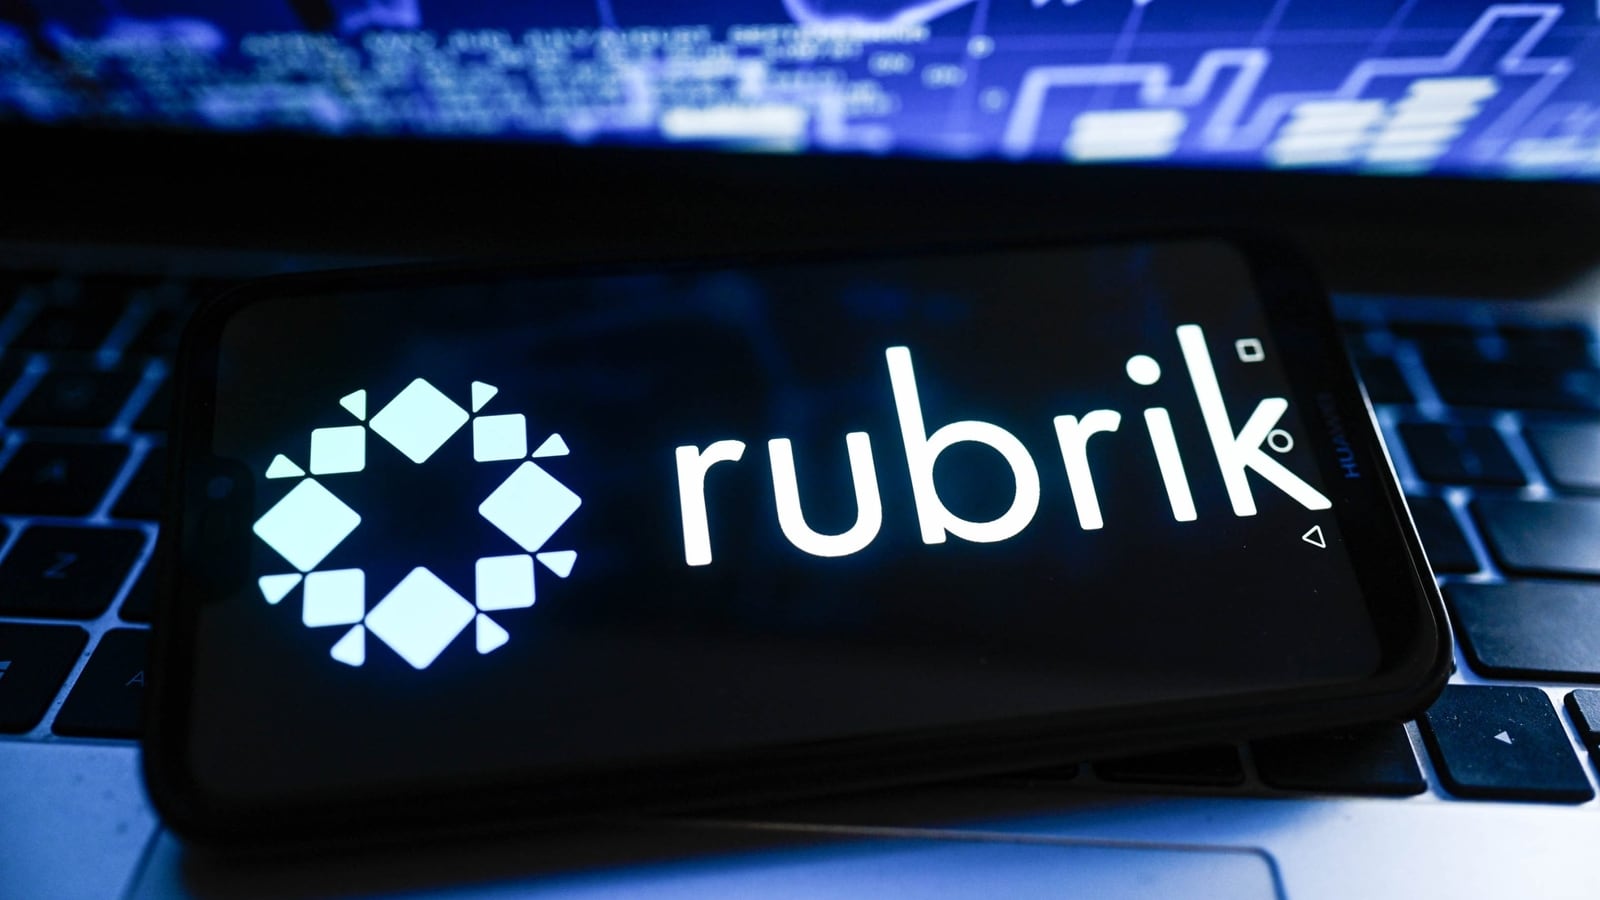 Rubrik: Microsoft-backed startup prices IPO at $32 per share to raise $752m